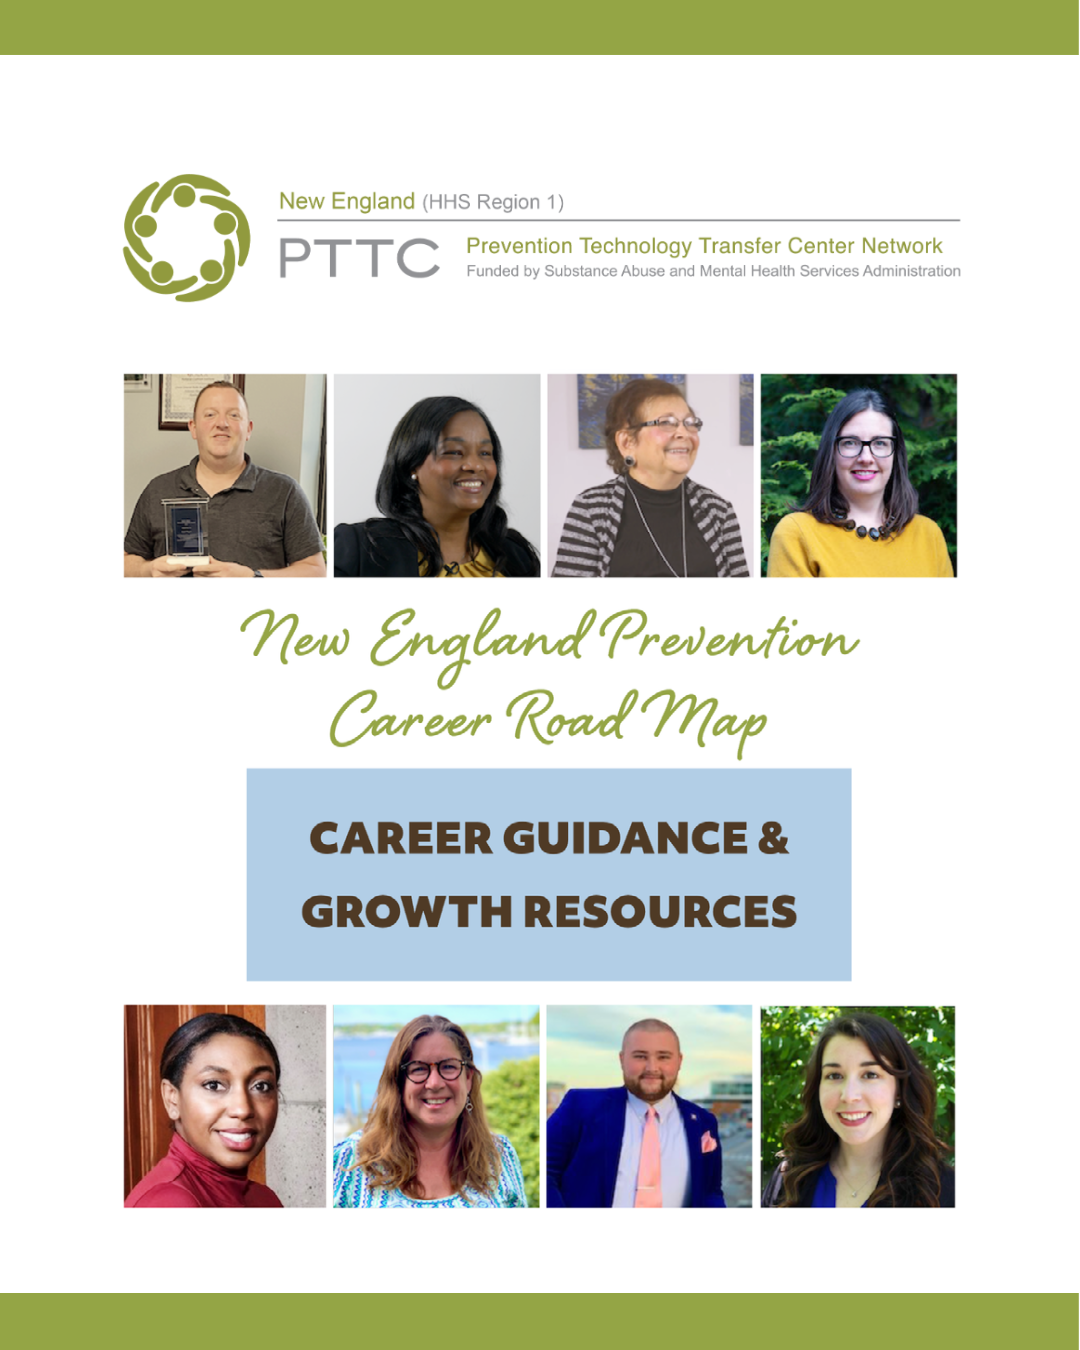 Announcing the New England Prevention Career Road Map